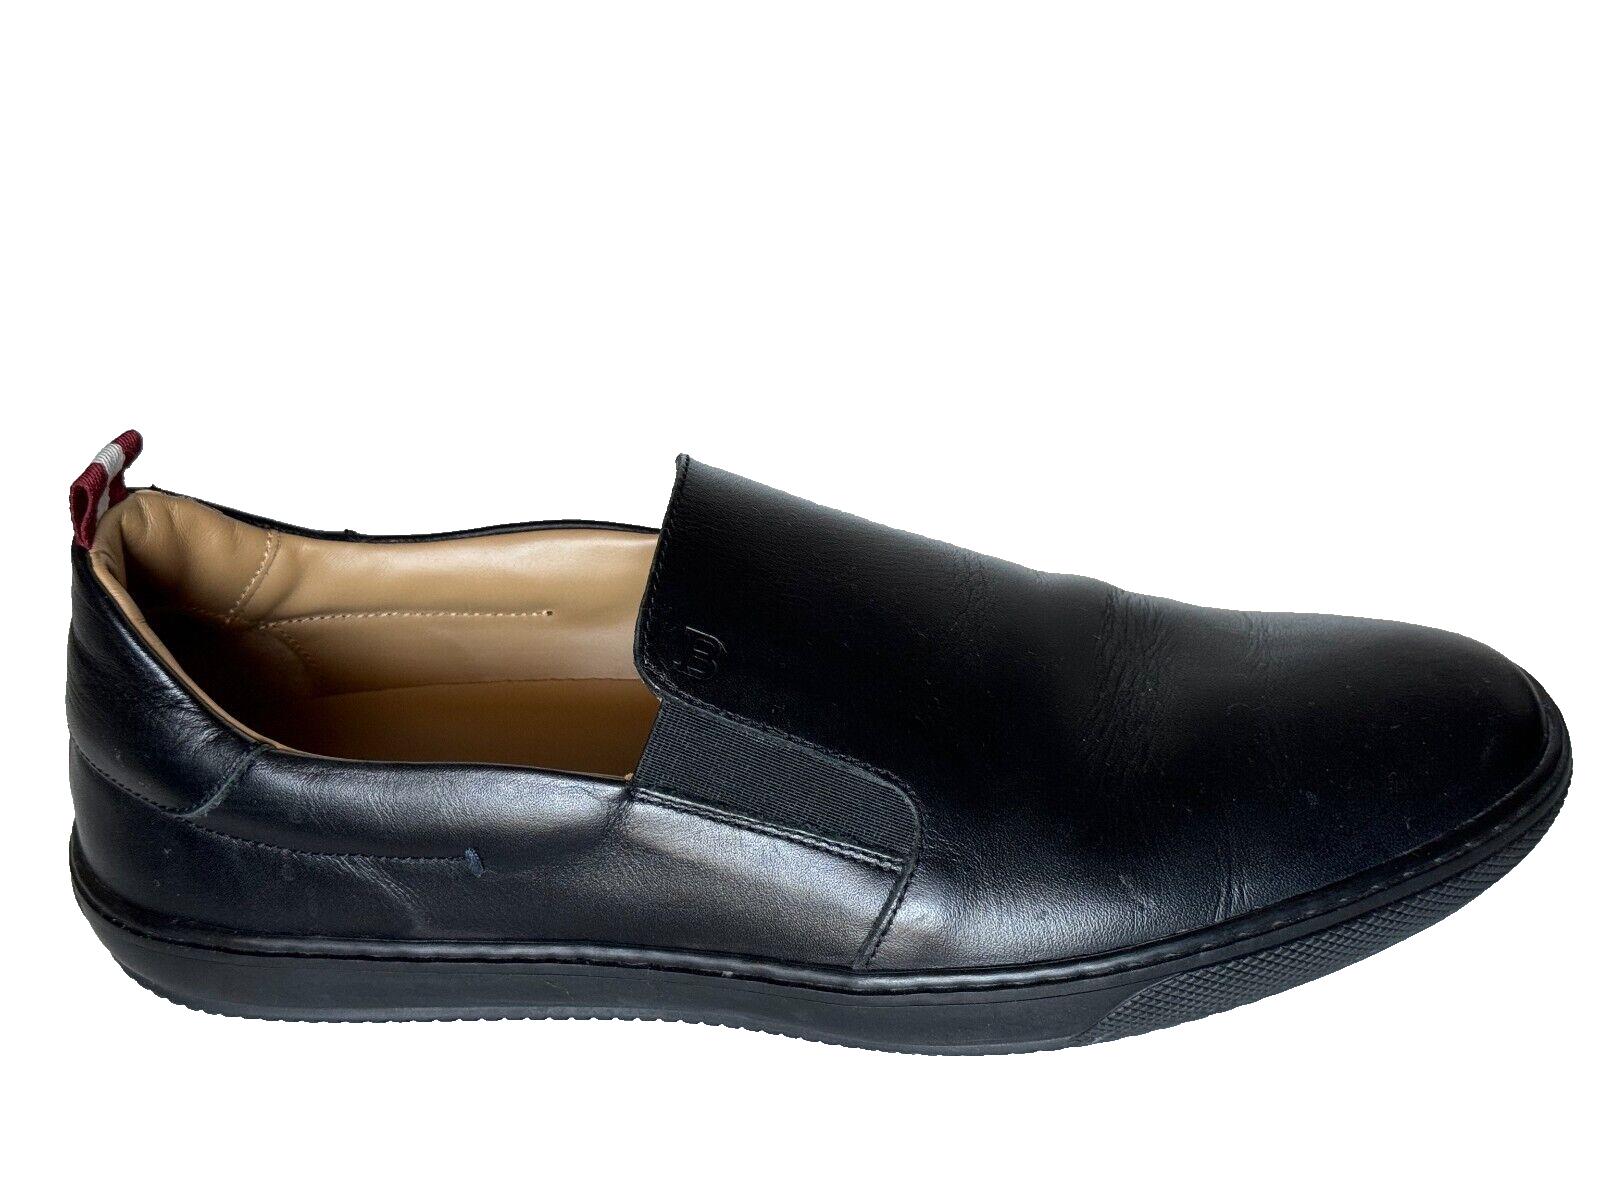 Bally Men's Calf Leather Driver Shoes Loafers Black 10 US Made in Italy